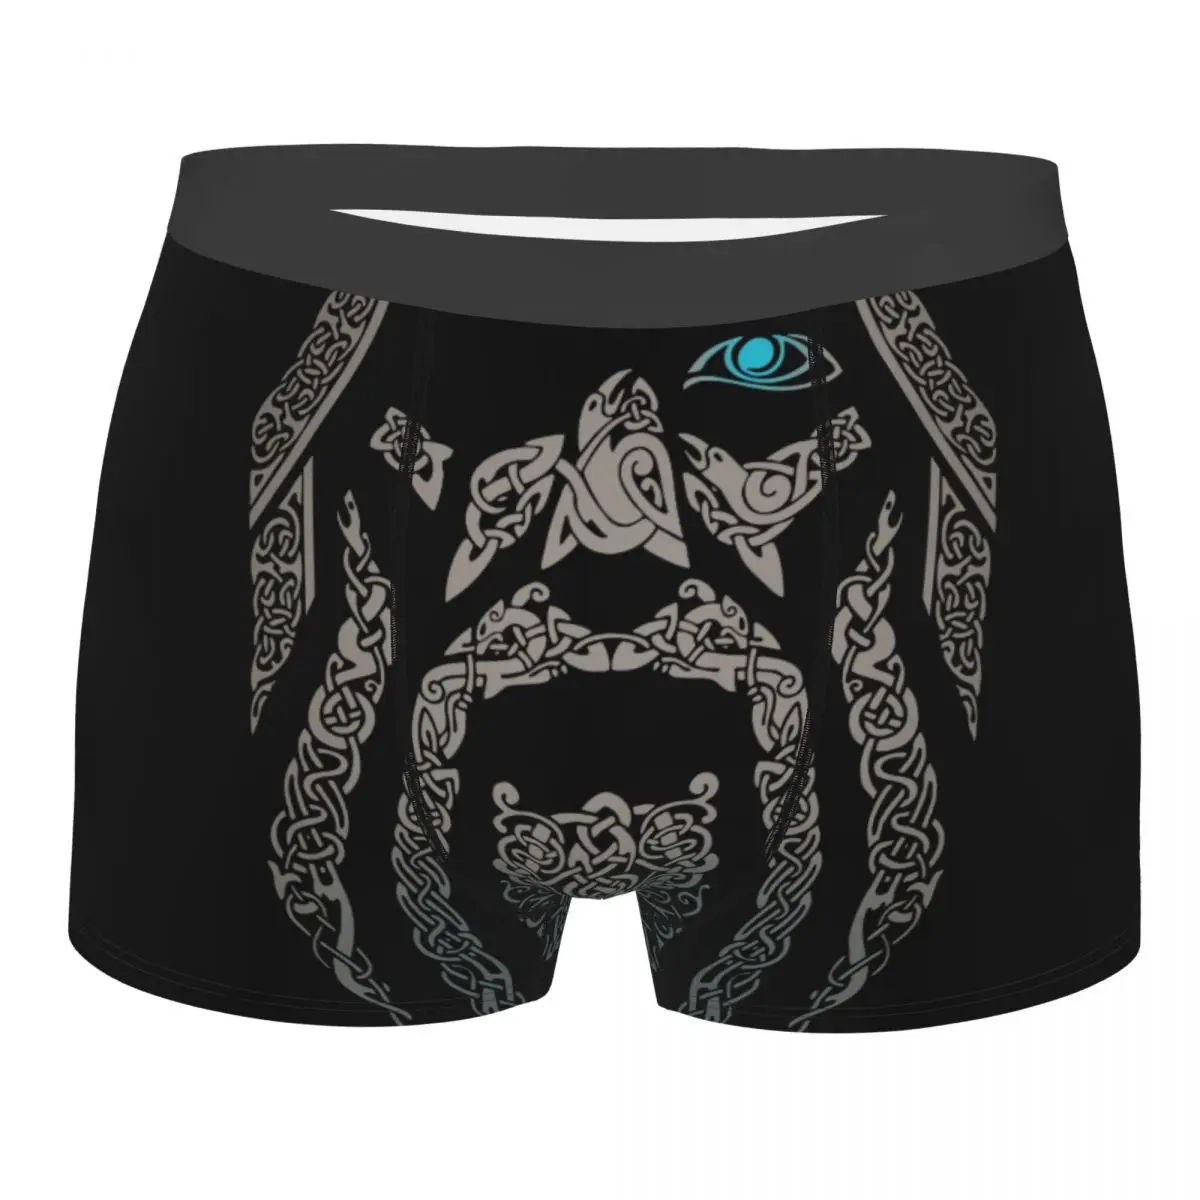 

ODIN Vikings Valhalla Son Of Odin Men Underwear Boxer Briefs Shorts Panties Humor Breathable Underpants for Male Plus Size